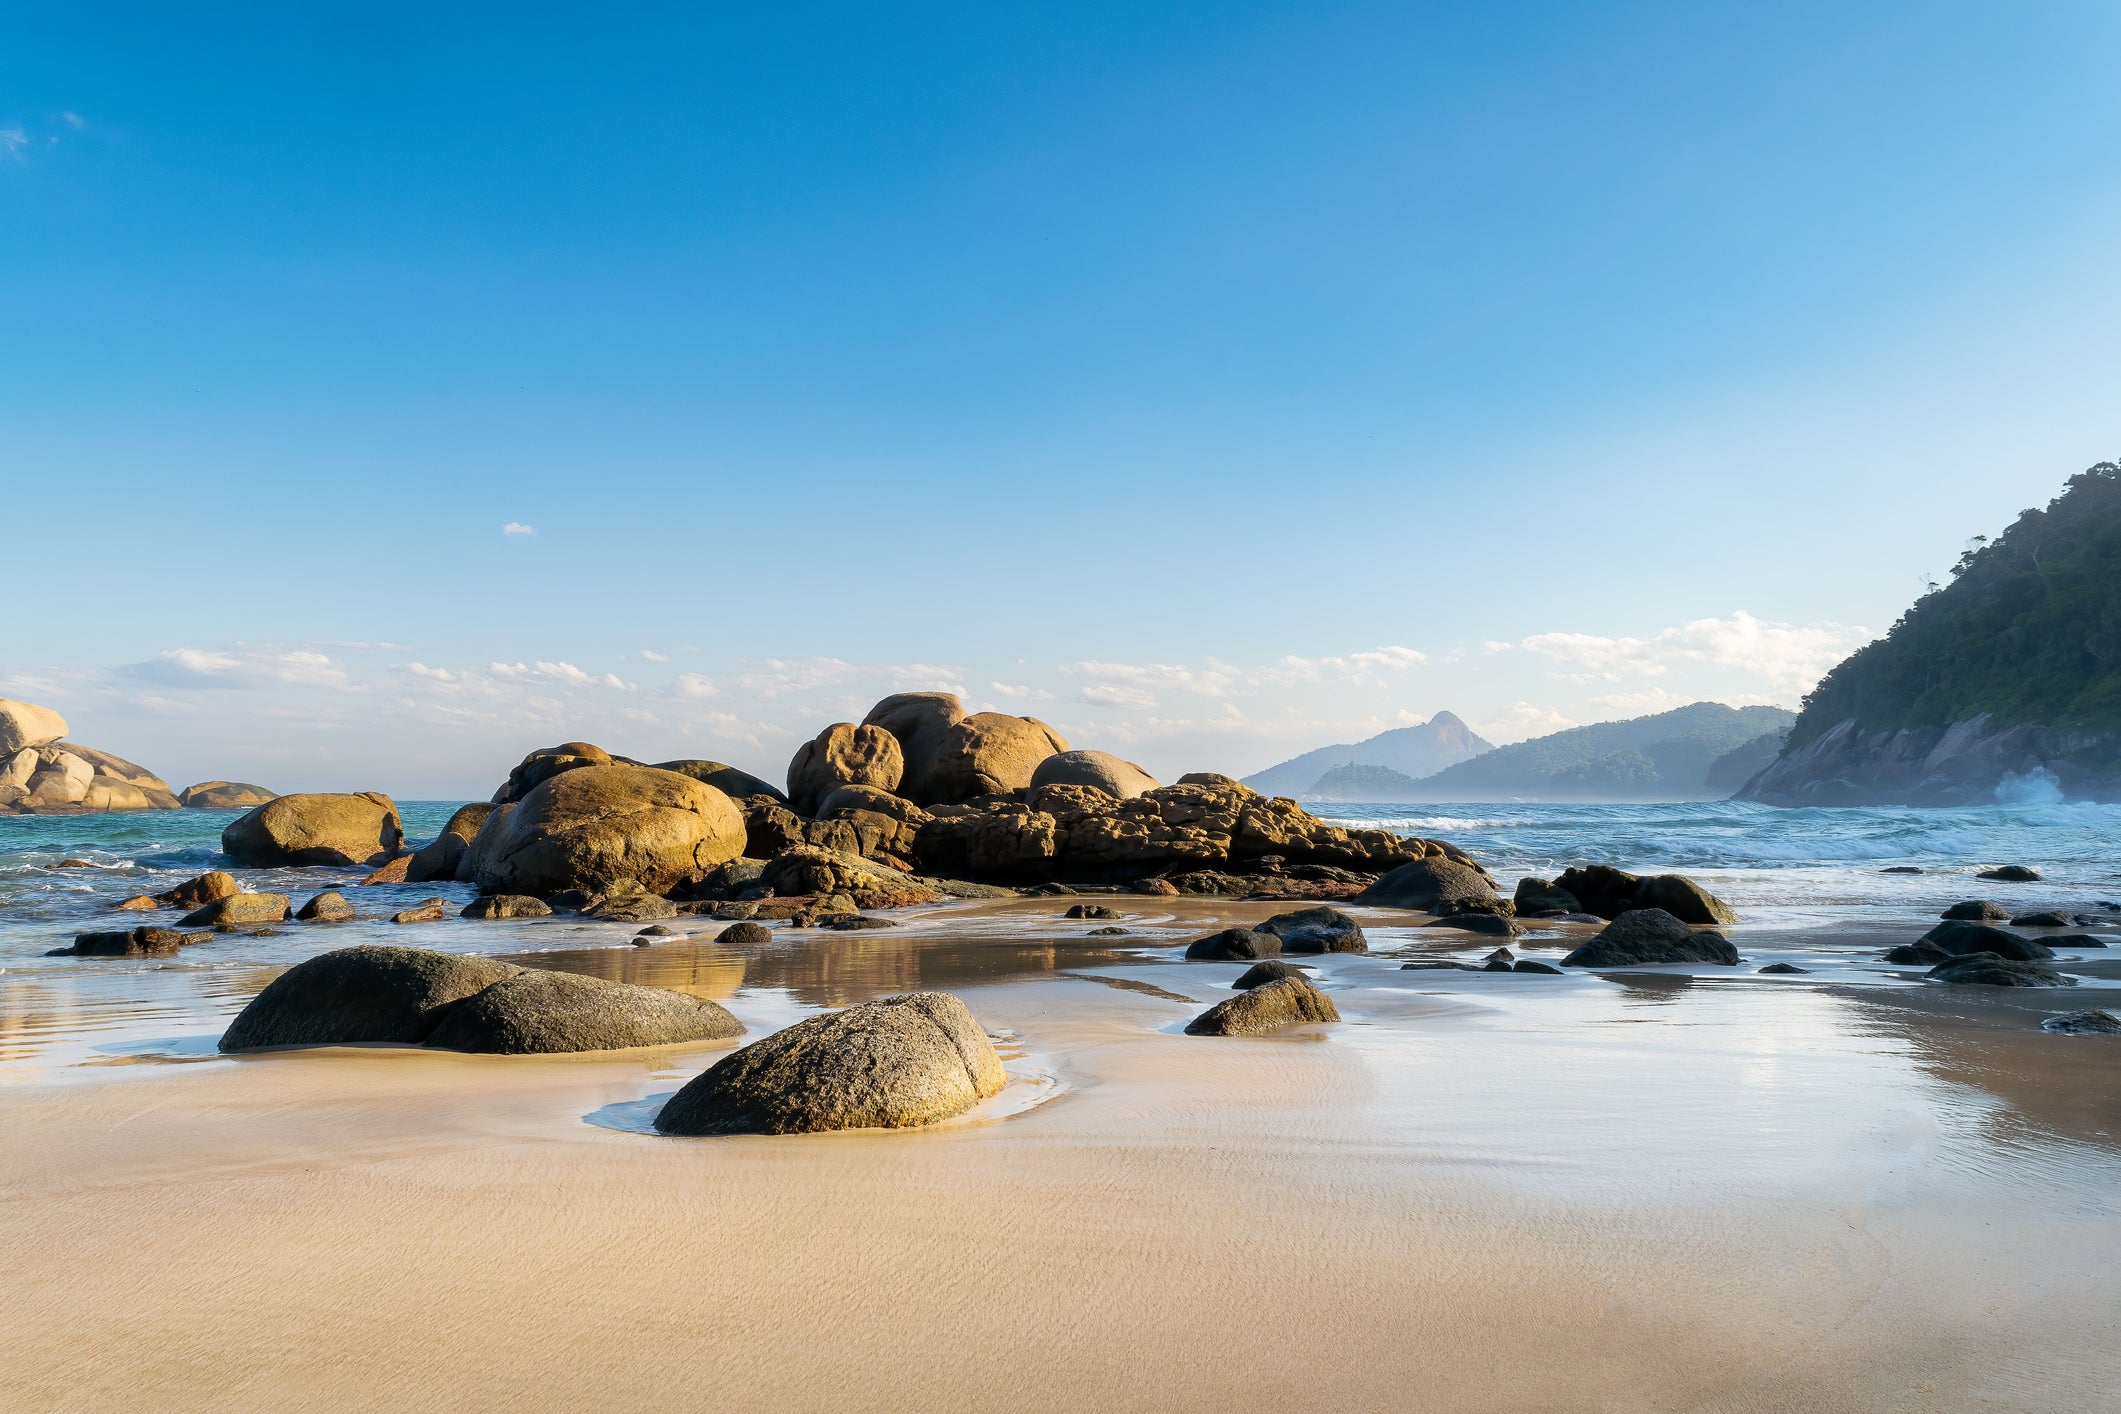 Lively corals teeming with marine life lap the powder sands on Lopes Mendes